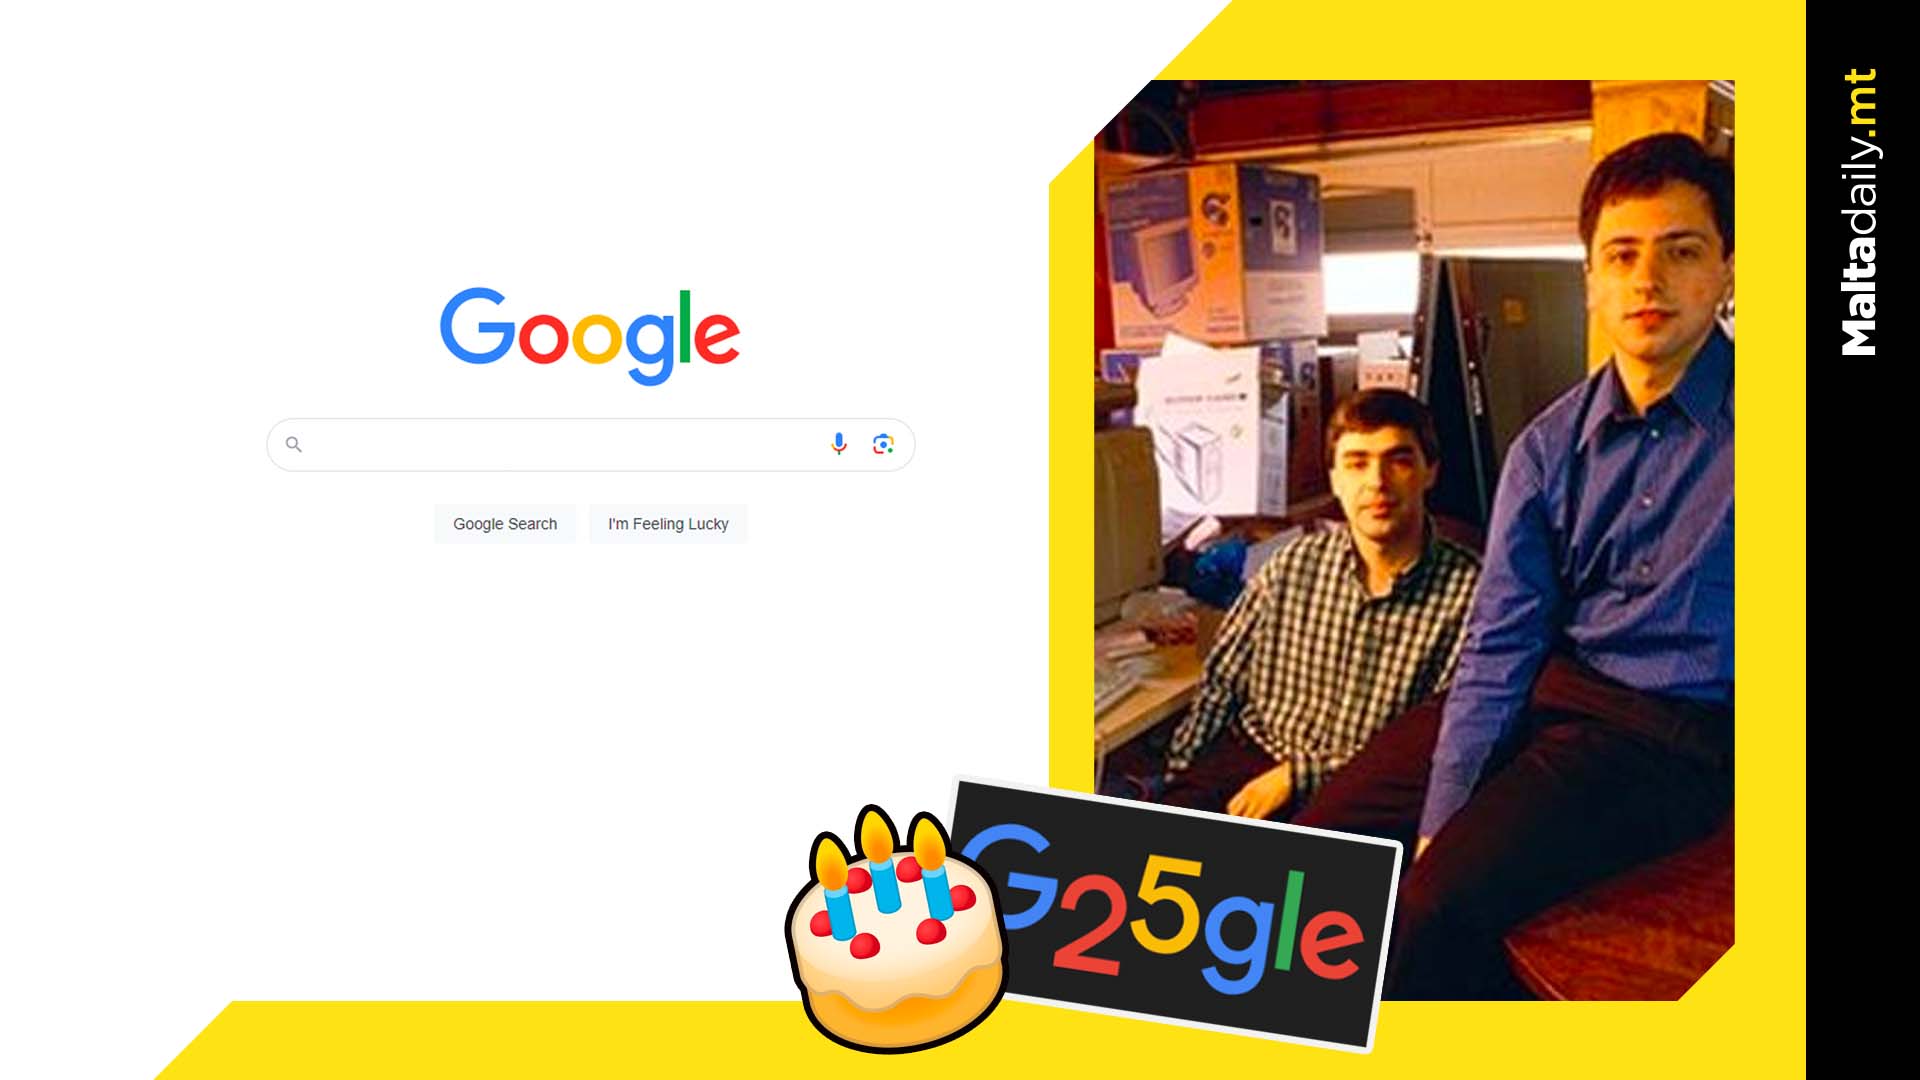 Google Turns 25 Years Old Today